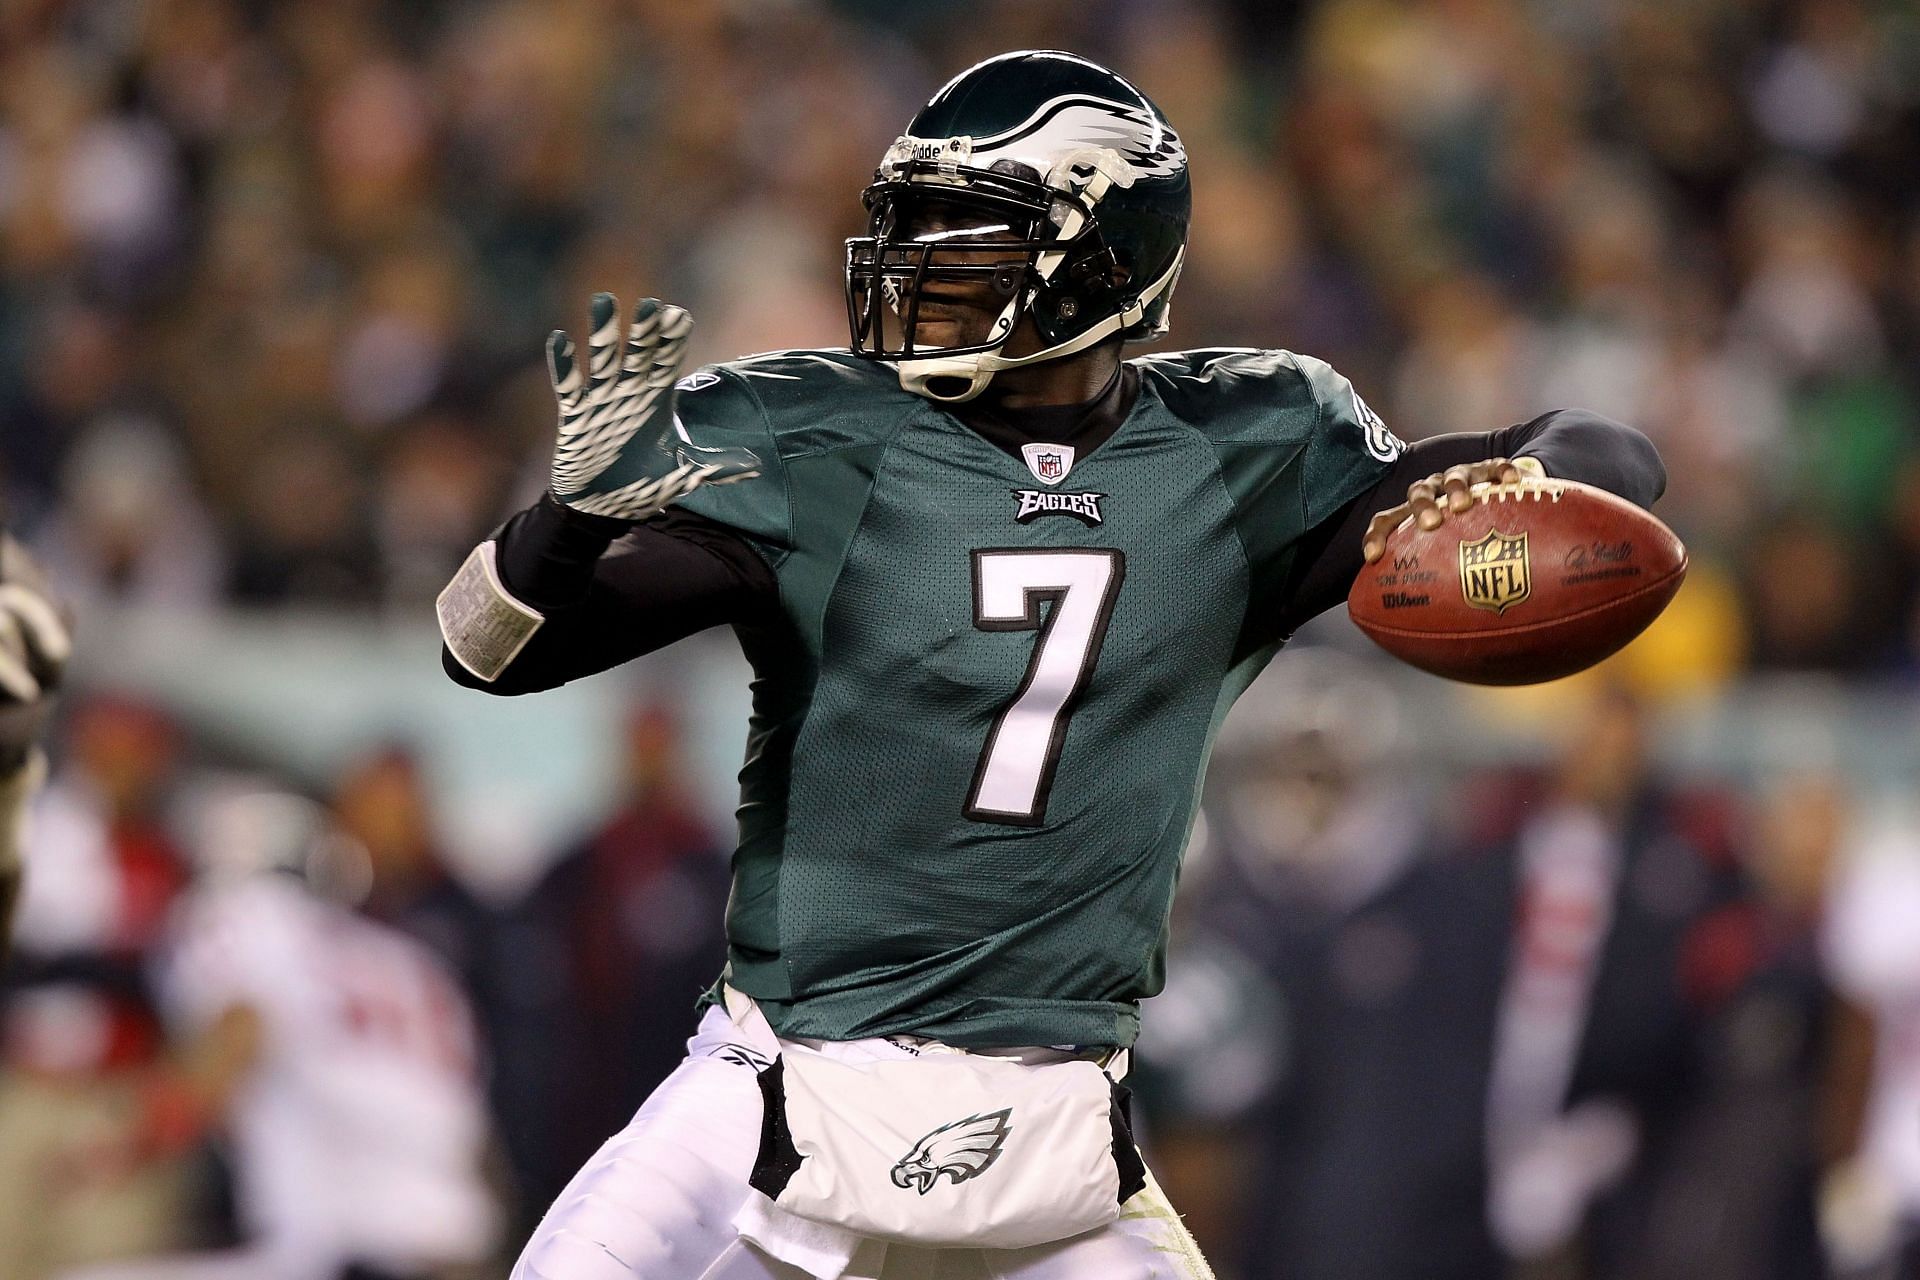 Michael Vick during his time with the Eagles